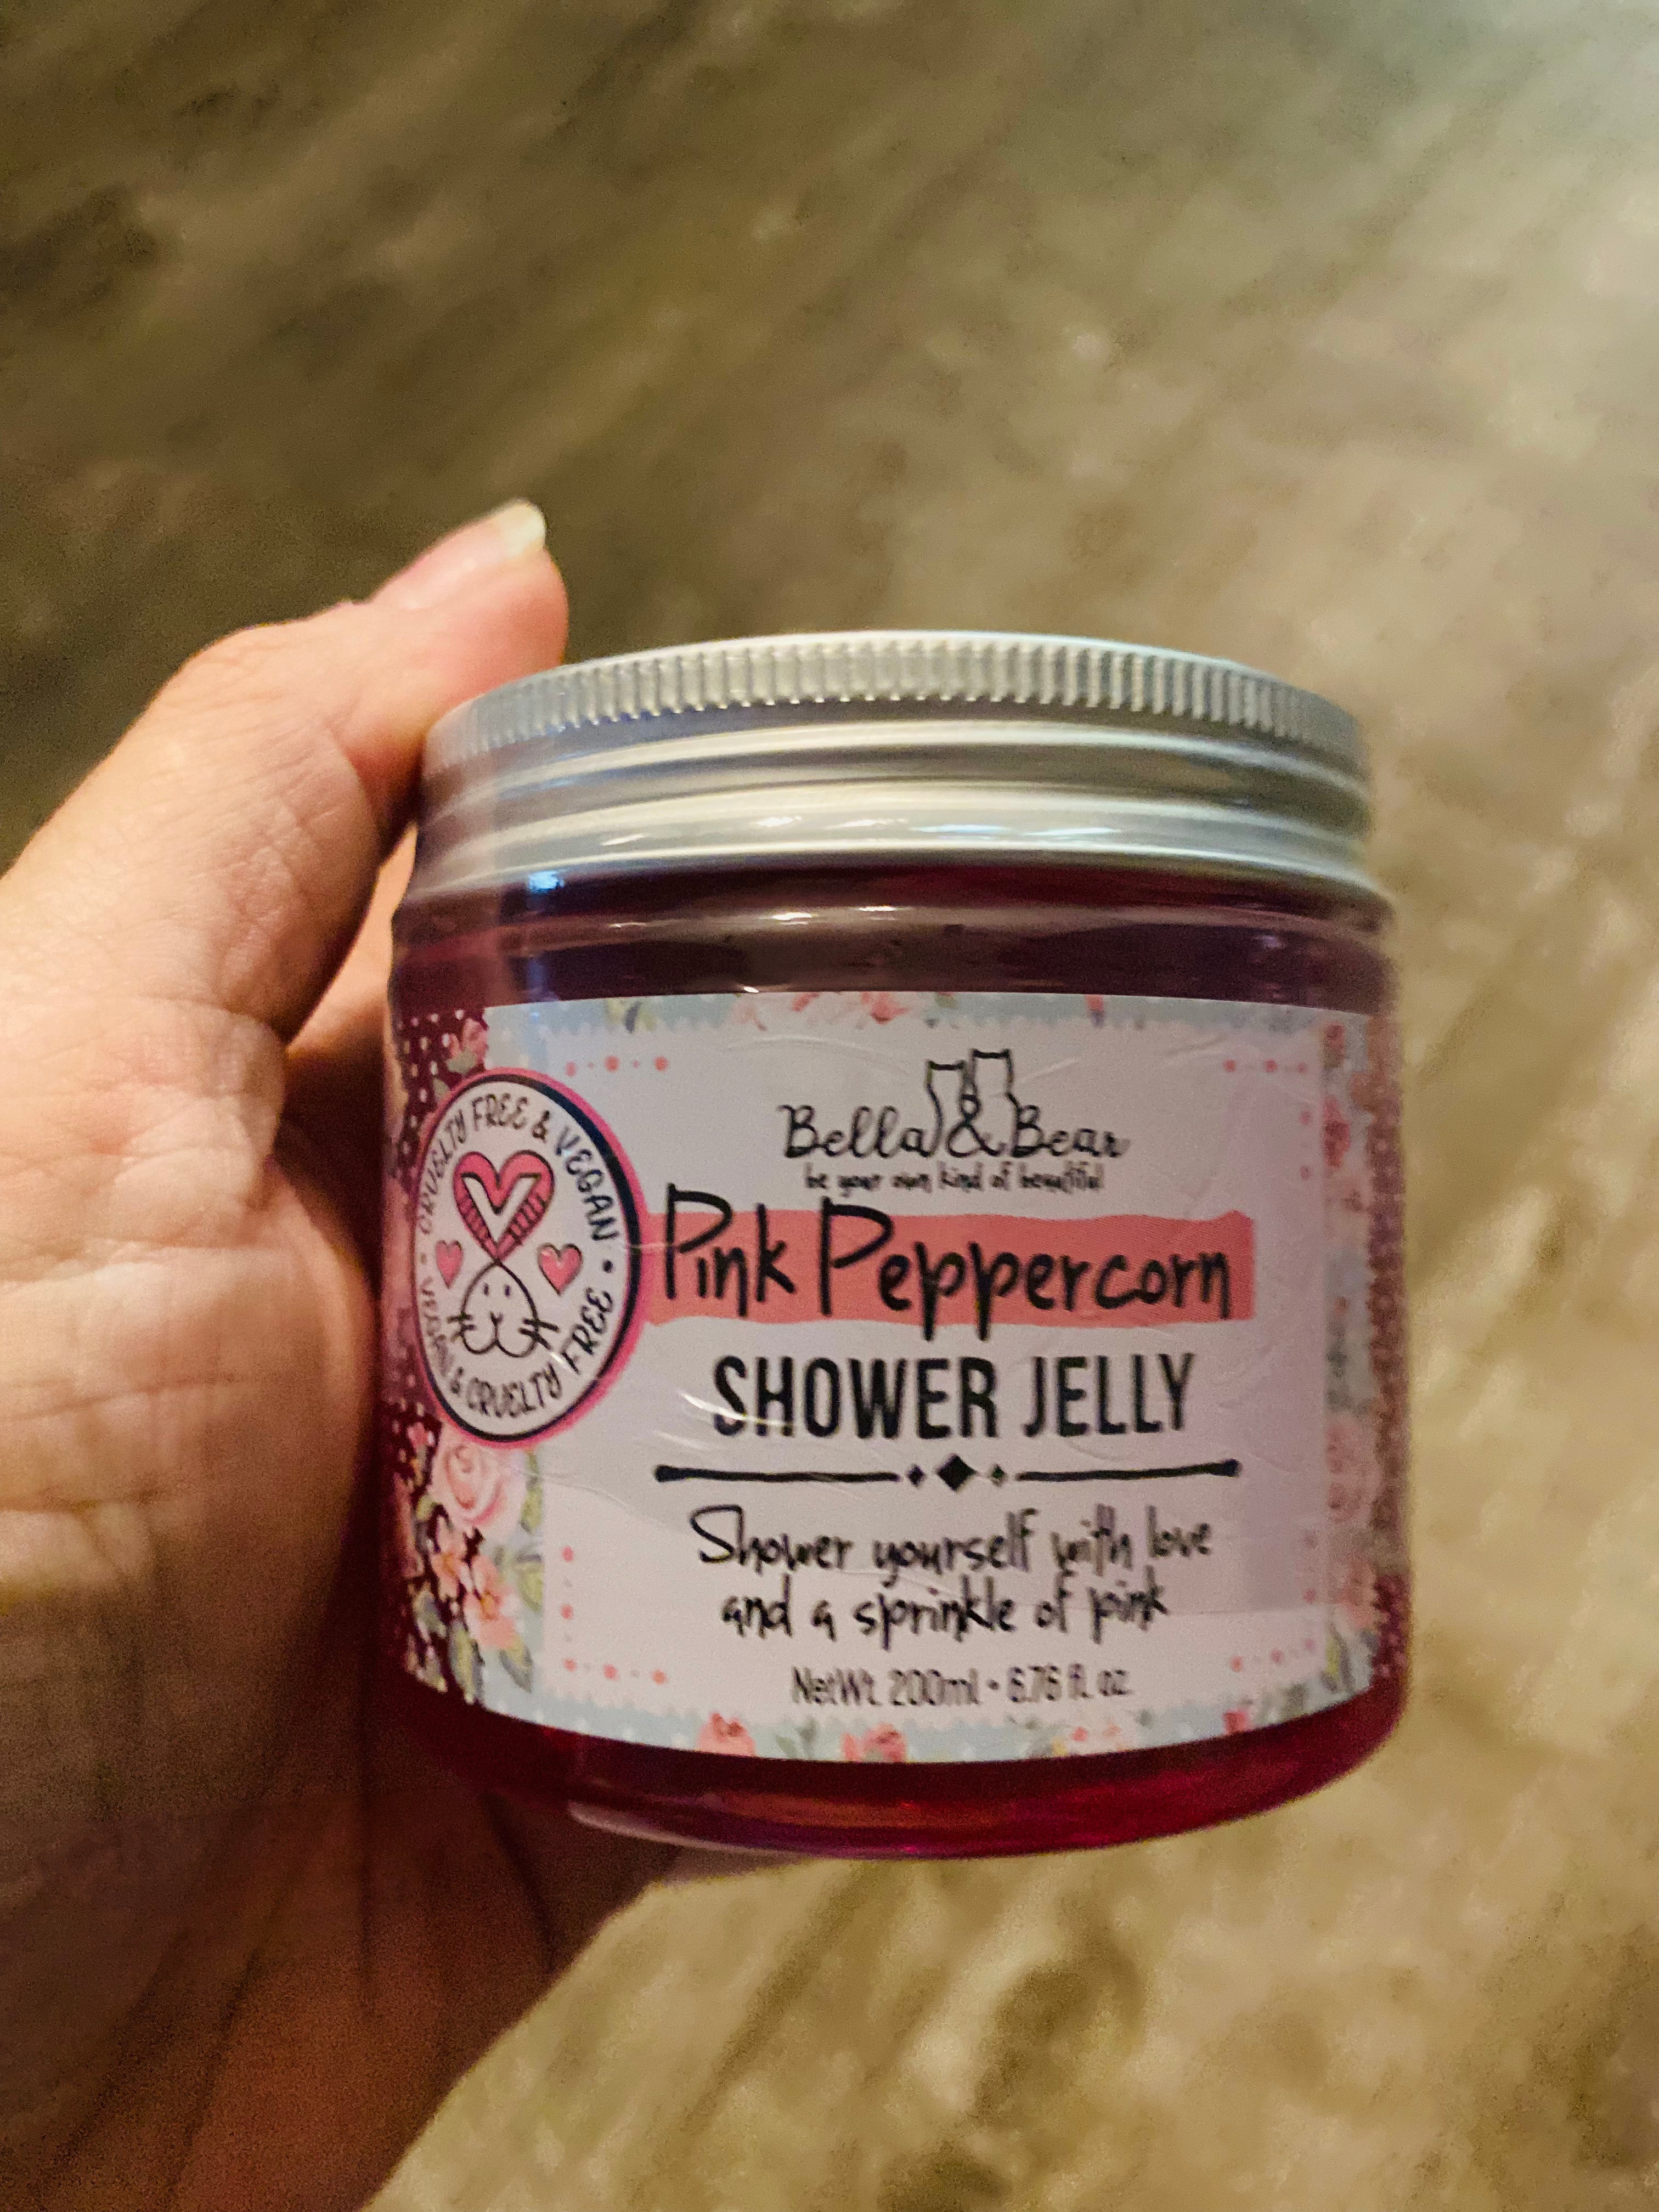 Shower Jelly